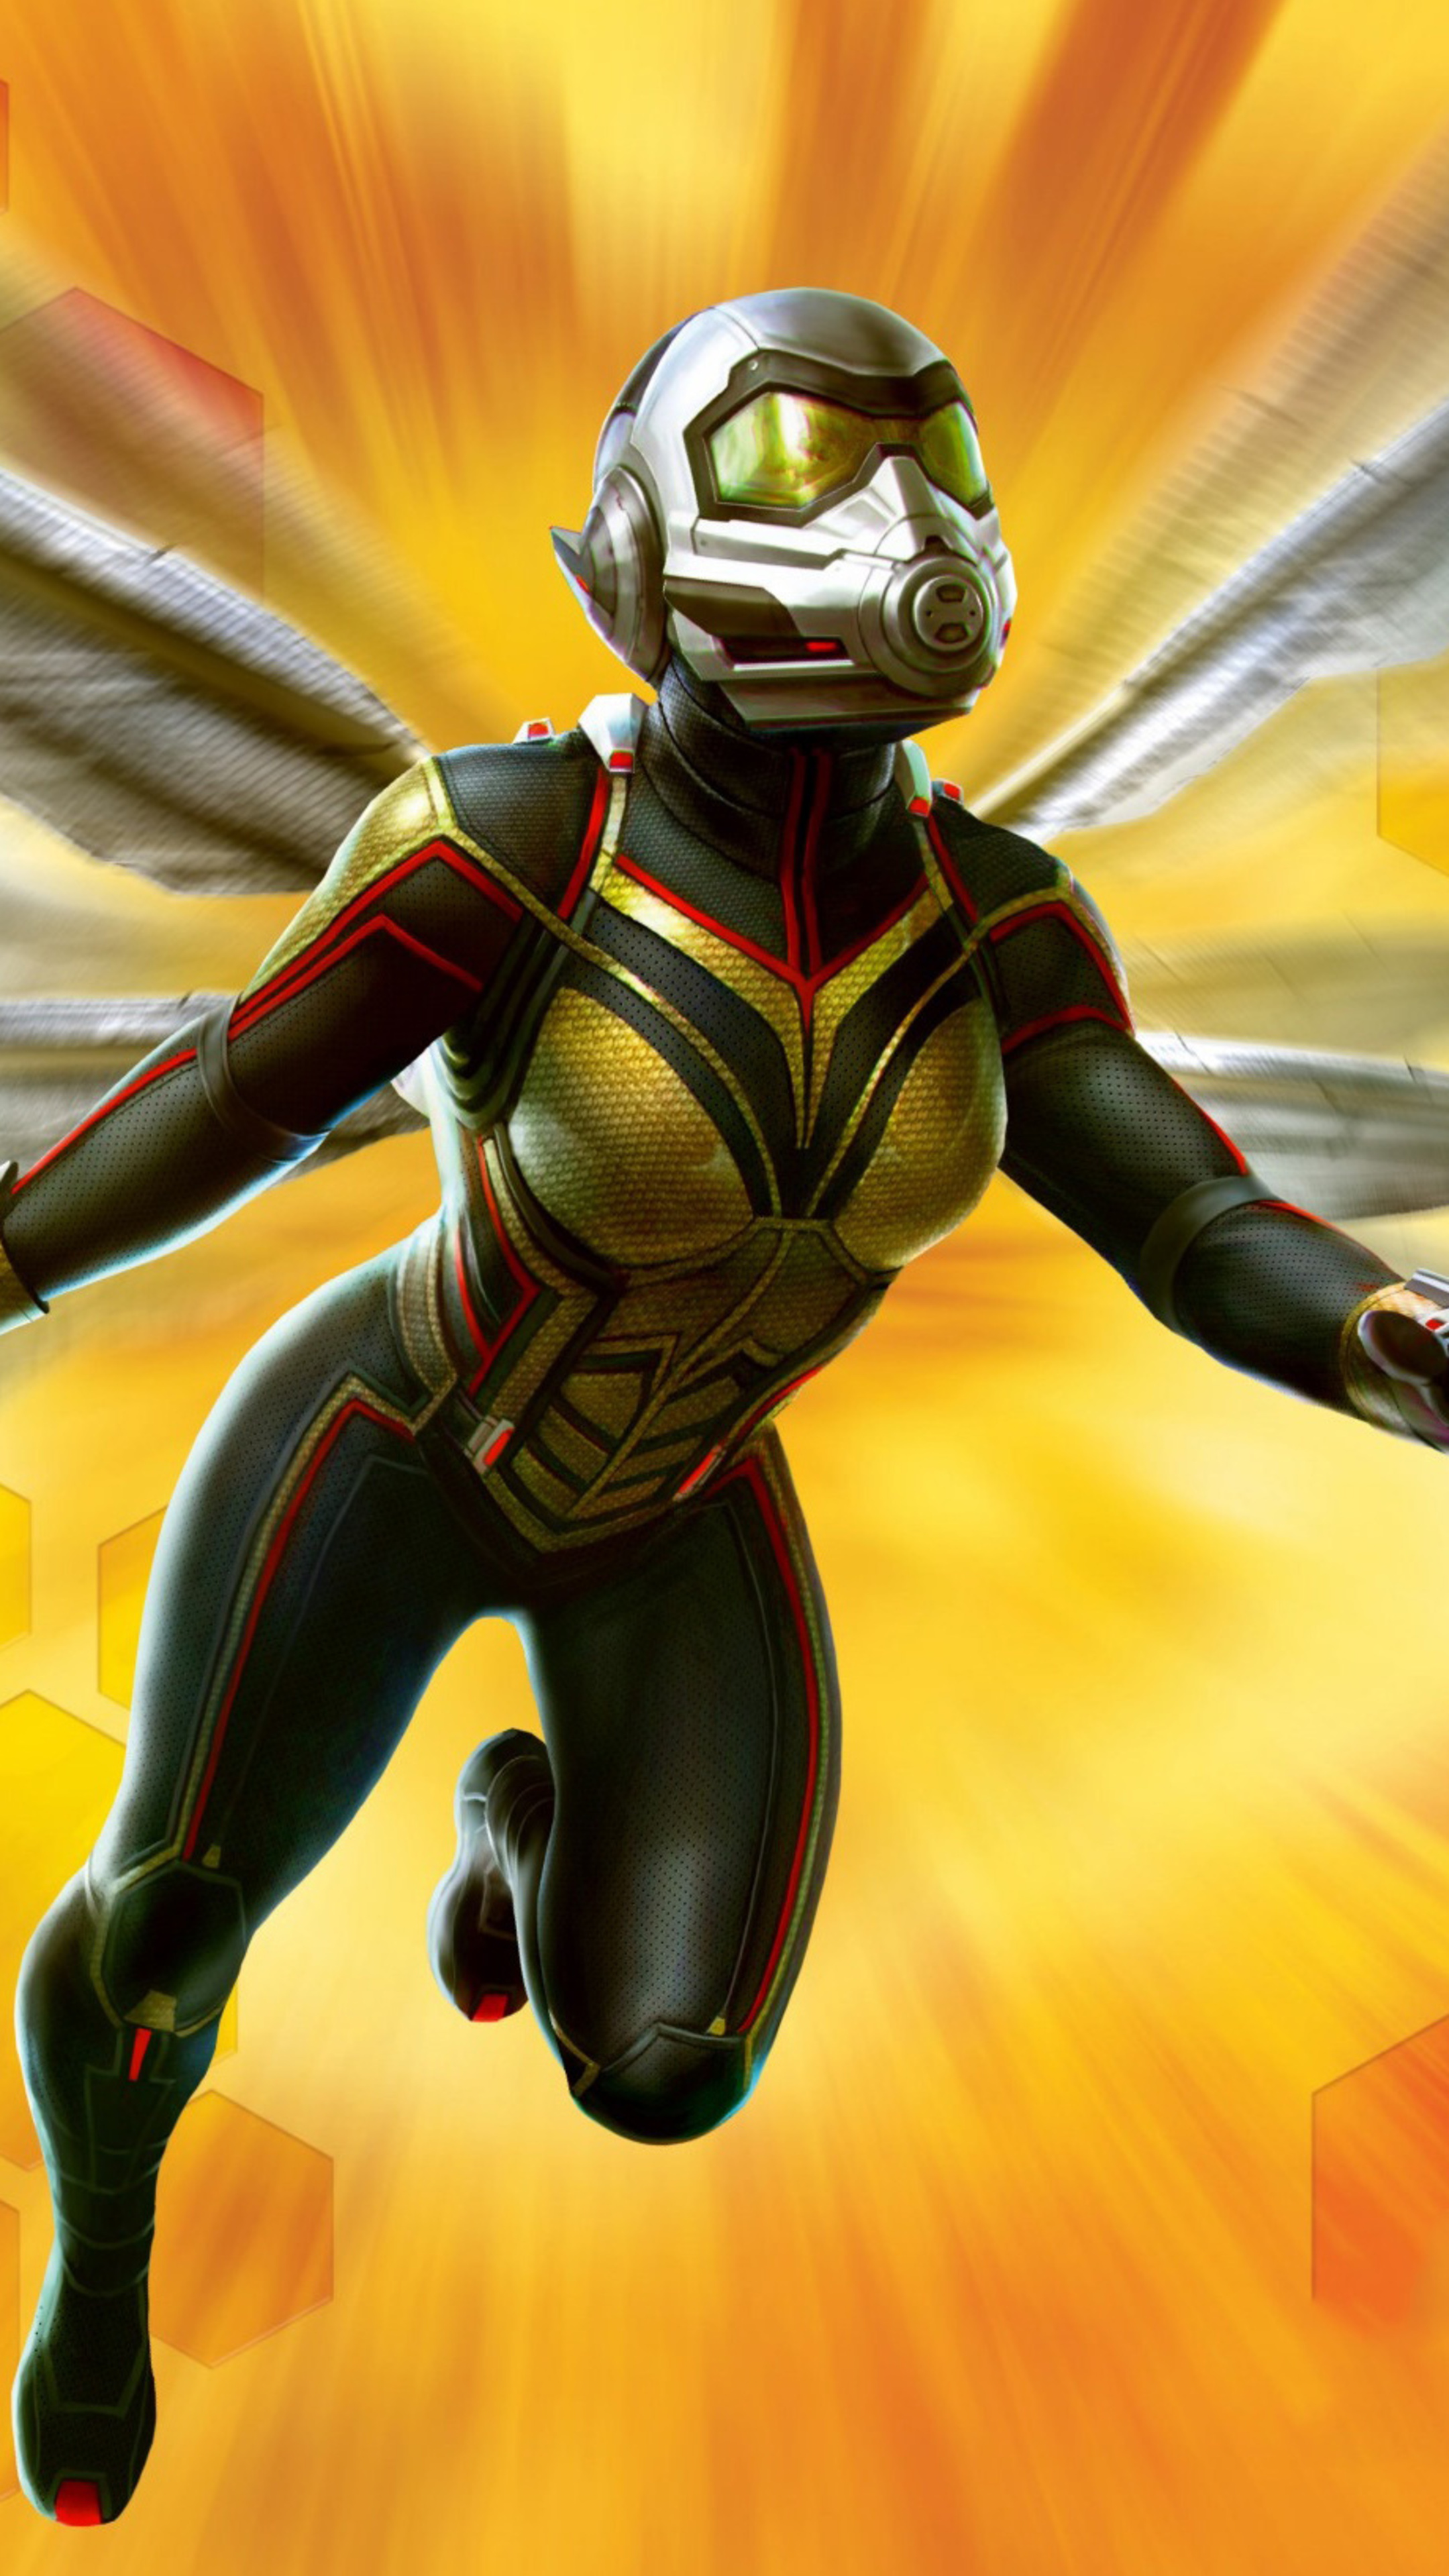 Ant Man And The Wasp Movie International Poster, HD Movies 